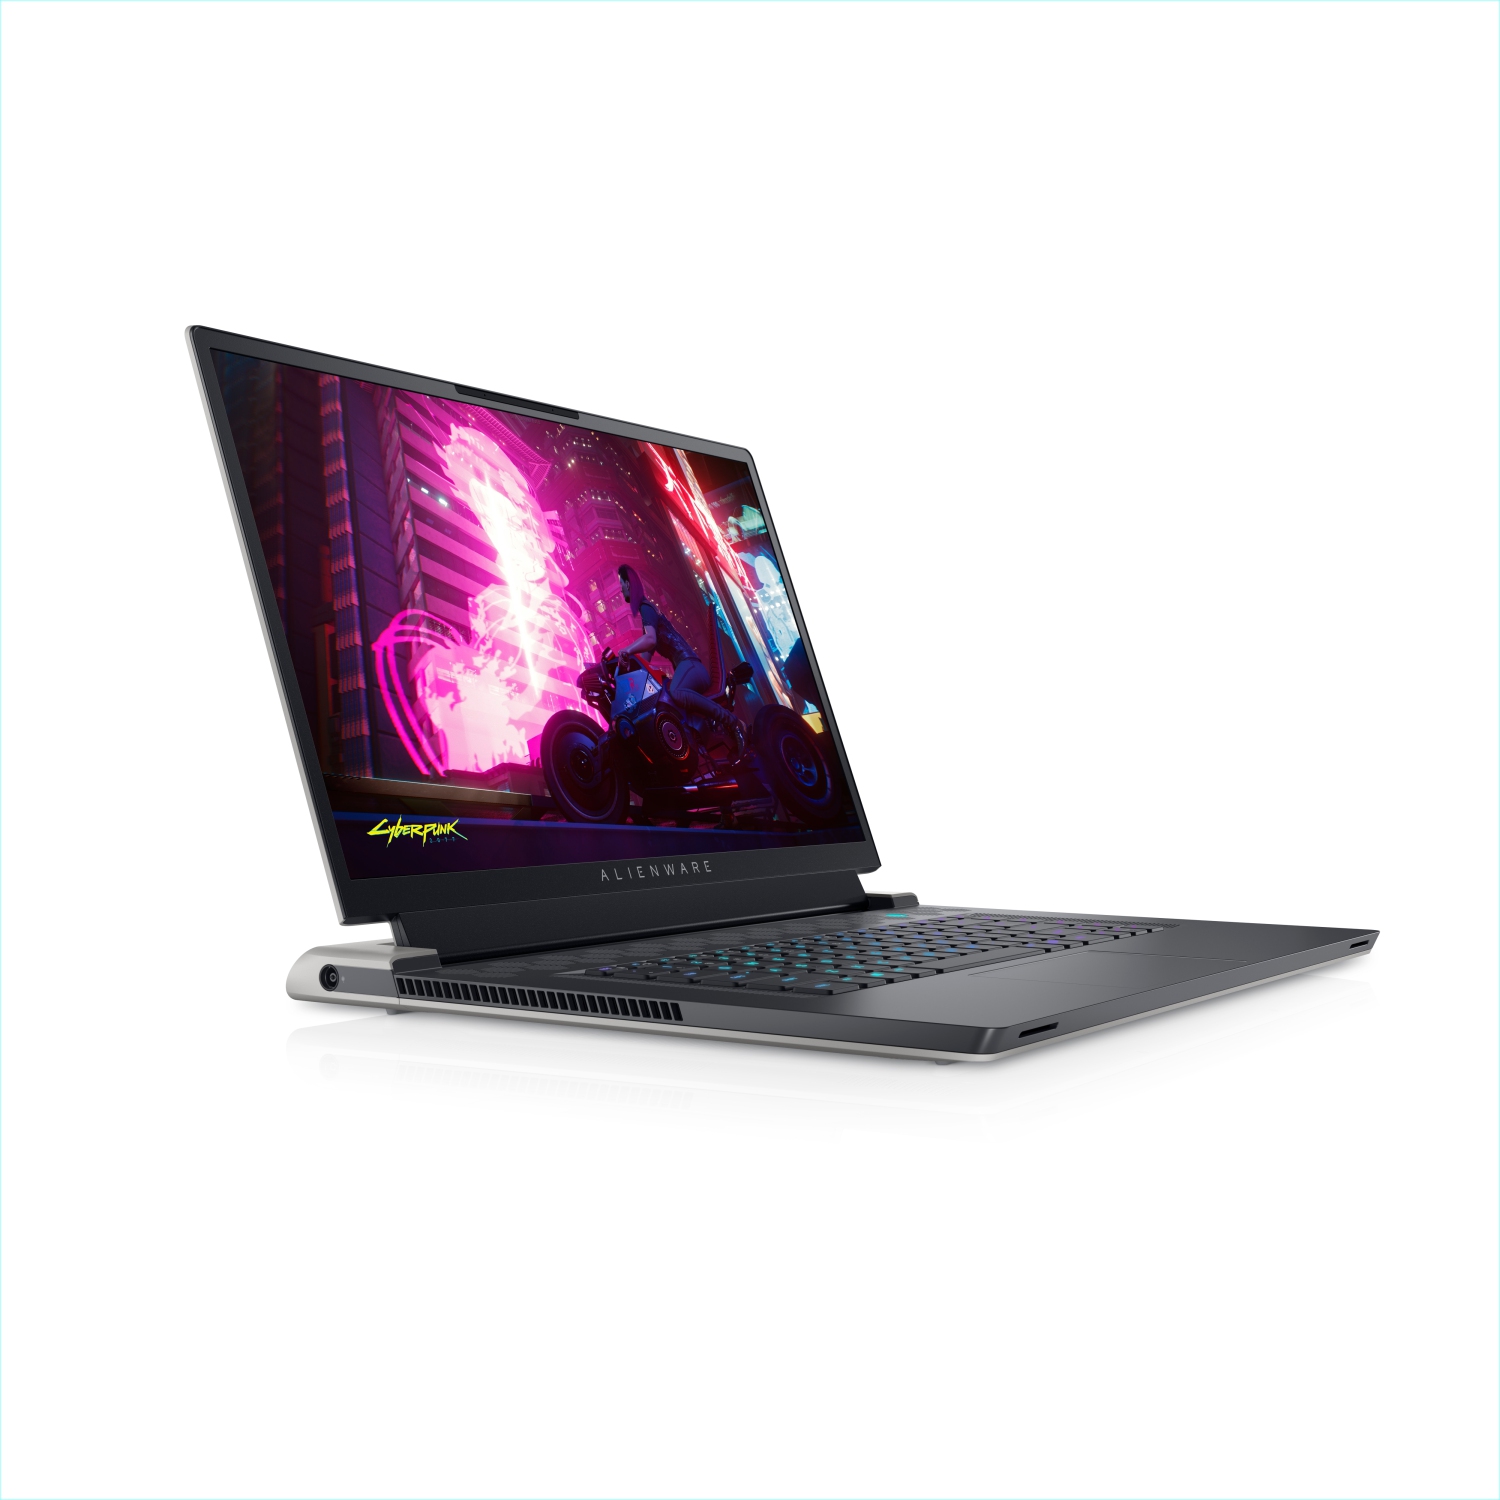 Refurbished (Excellent) - Dell Alienware X17 R1 Gaming Laptop (2021), 17.3" FHD, Core i7, 512GB SSD, 16GB RAM, RTX 3080, 8 Cores @ 4.6 GHz, 11th Gen CPU Certified